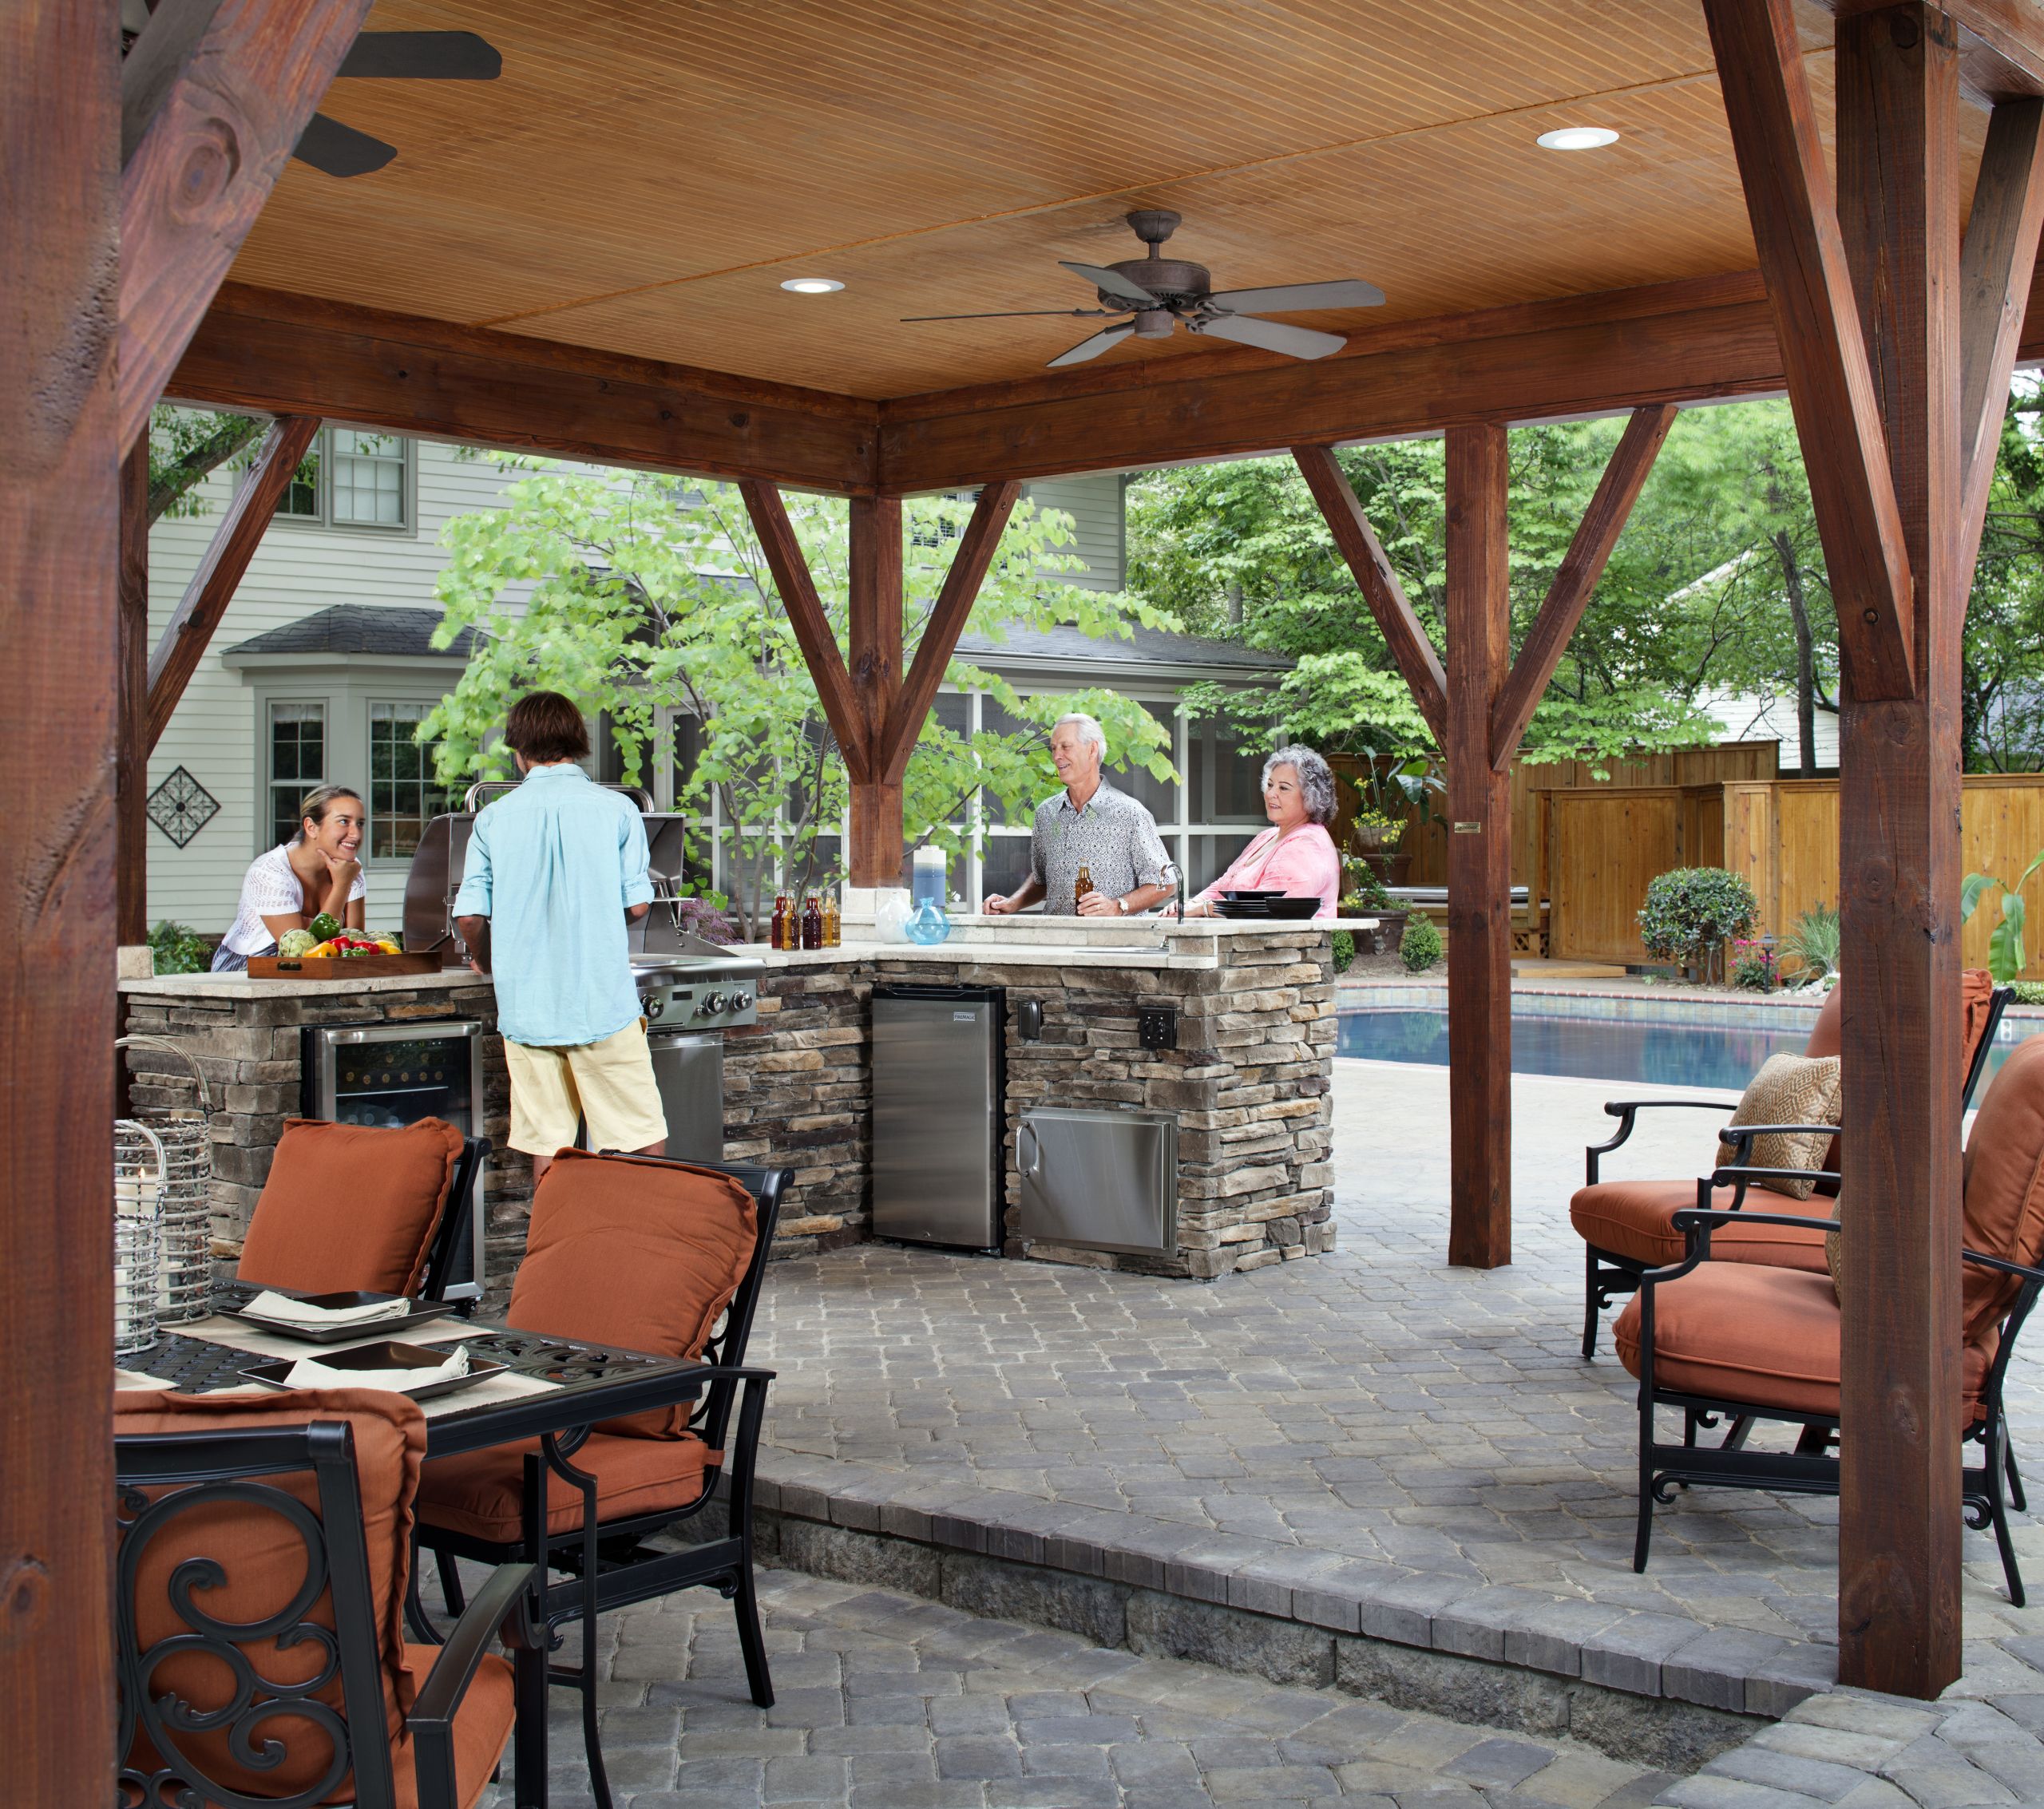 Outdoor Kitchen Covered Patio
 Columbia SC outdoor kitchens